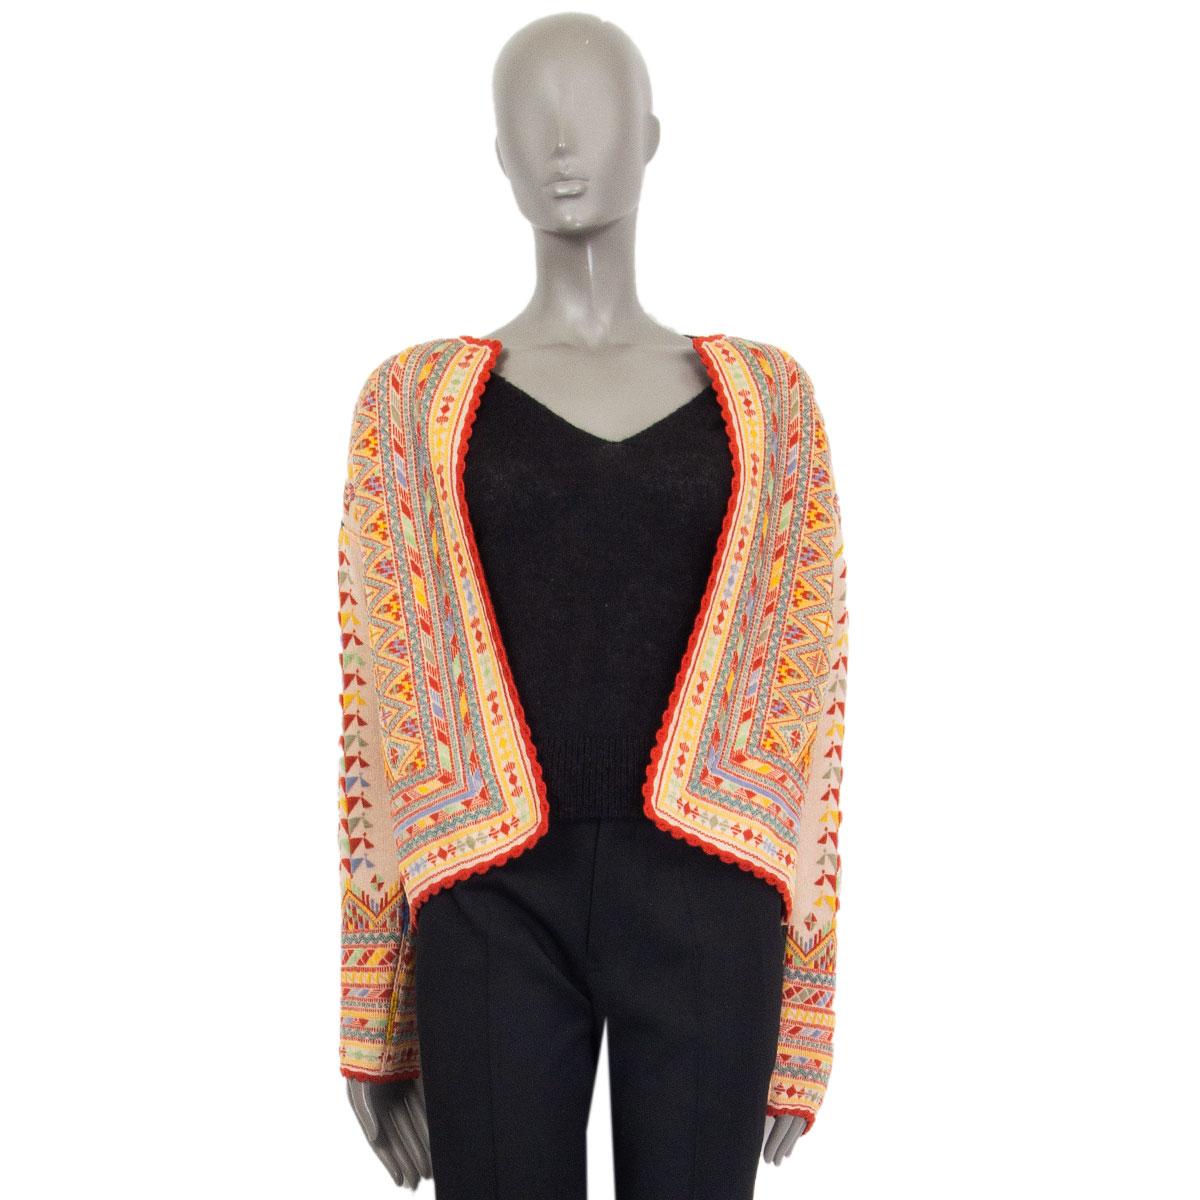 authentic Etro open knitted jacket in nude, red, mustard yellow, light green and blue wool (39%) viscose (28%) cotton (12%) polyester (9%) silk (6%) elastane (3%) other fiber (3%) with a geometric pattern, curved knitting along the hemline and long